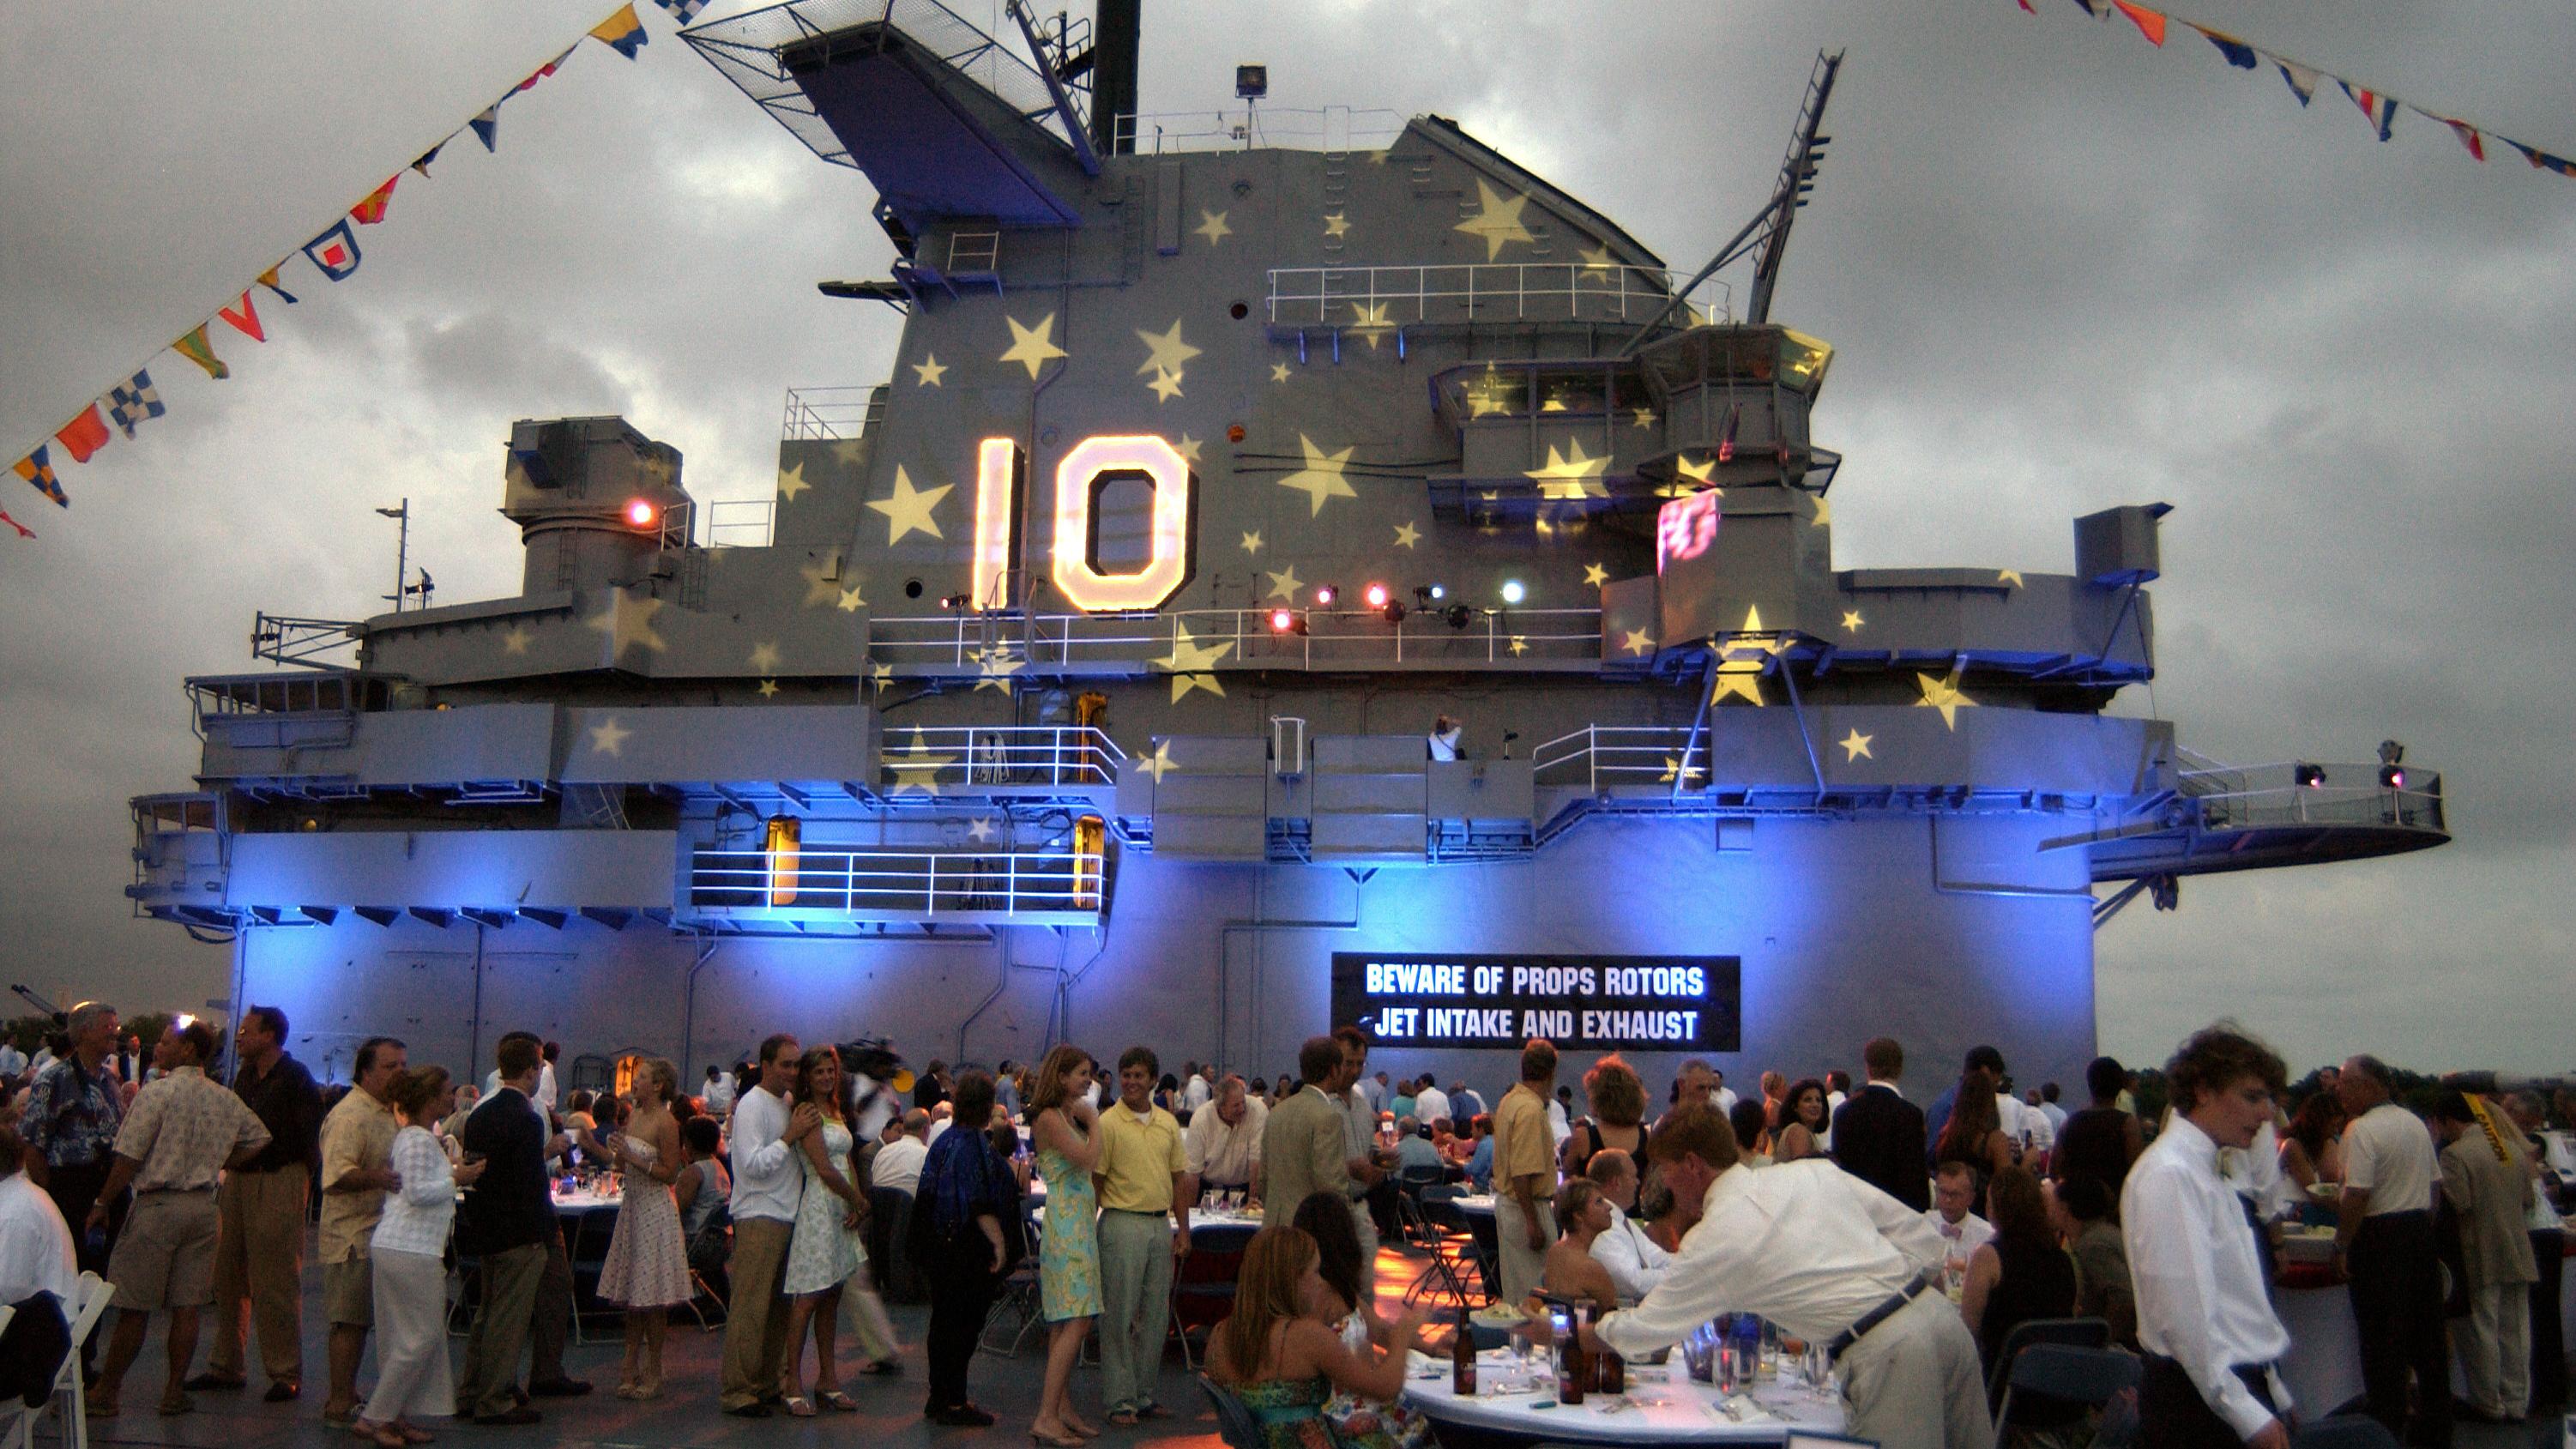 image of an evening event on the flight deck of the USS Yorktown